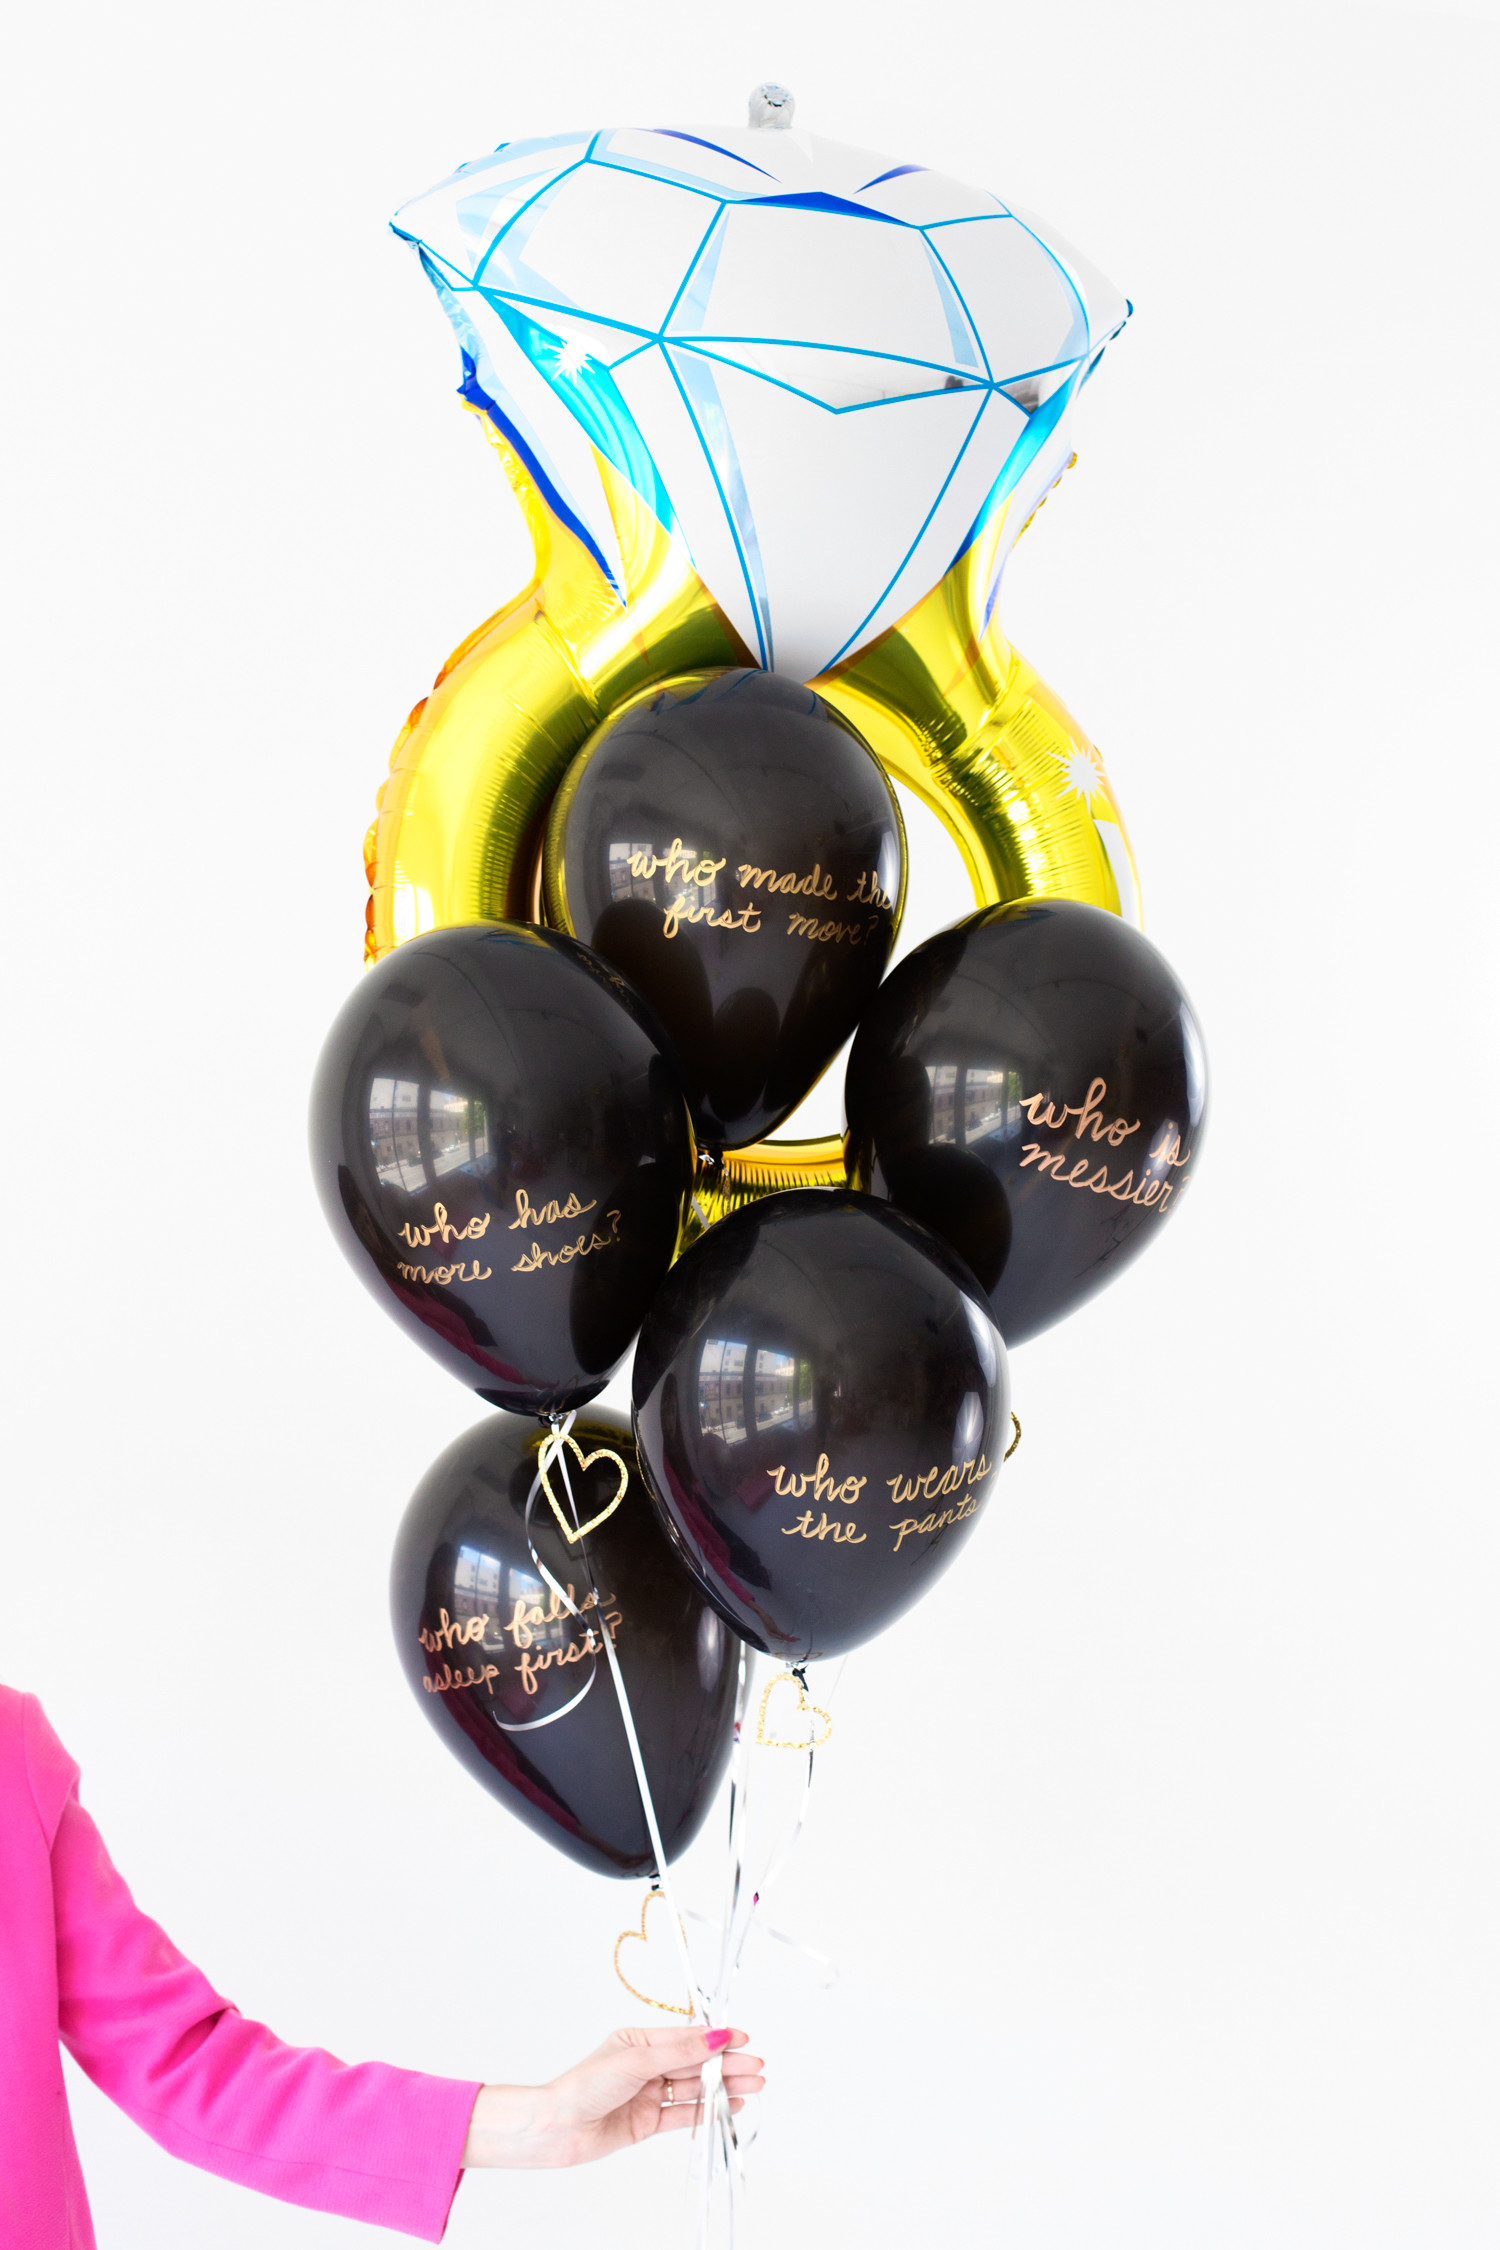 Game Ideas For Engagement Party
 DIY Engagement Party Balloon Game